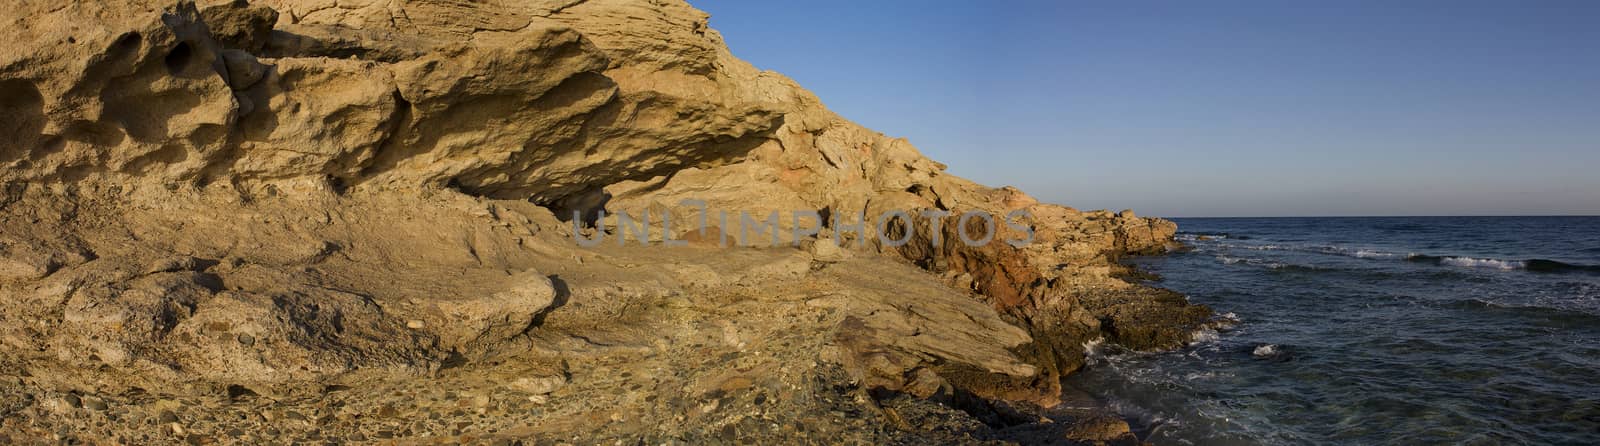 view of the Red Sea and the coastal cliffs.